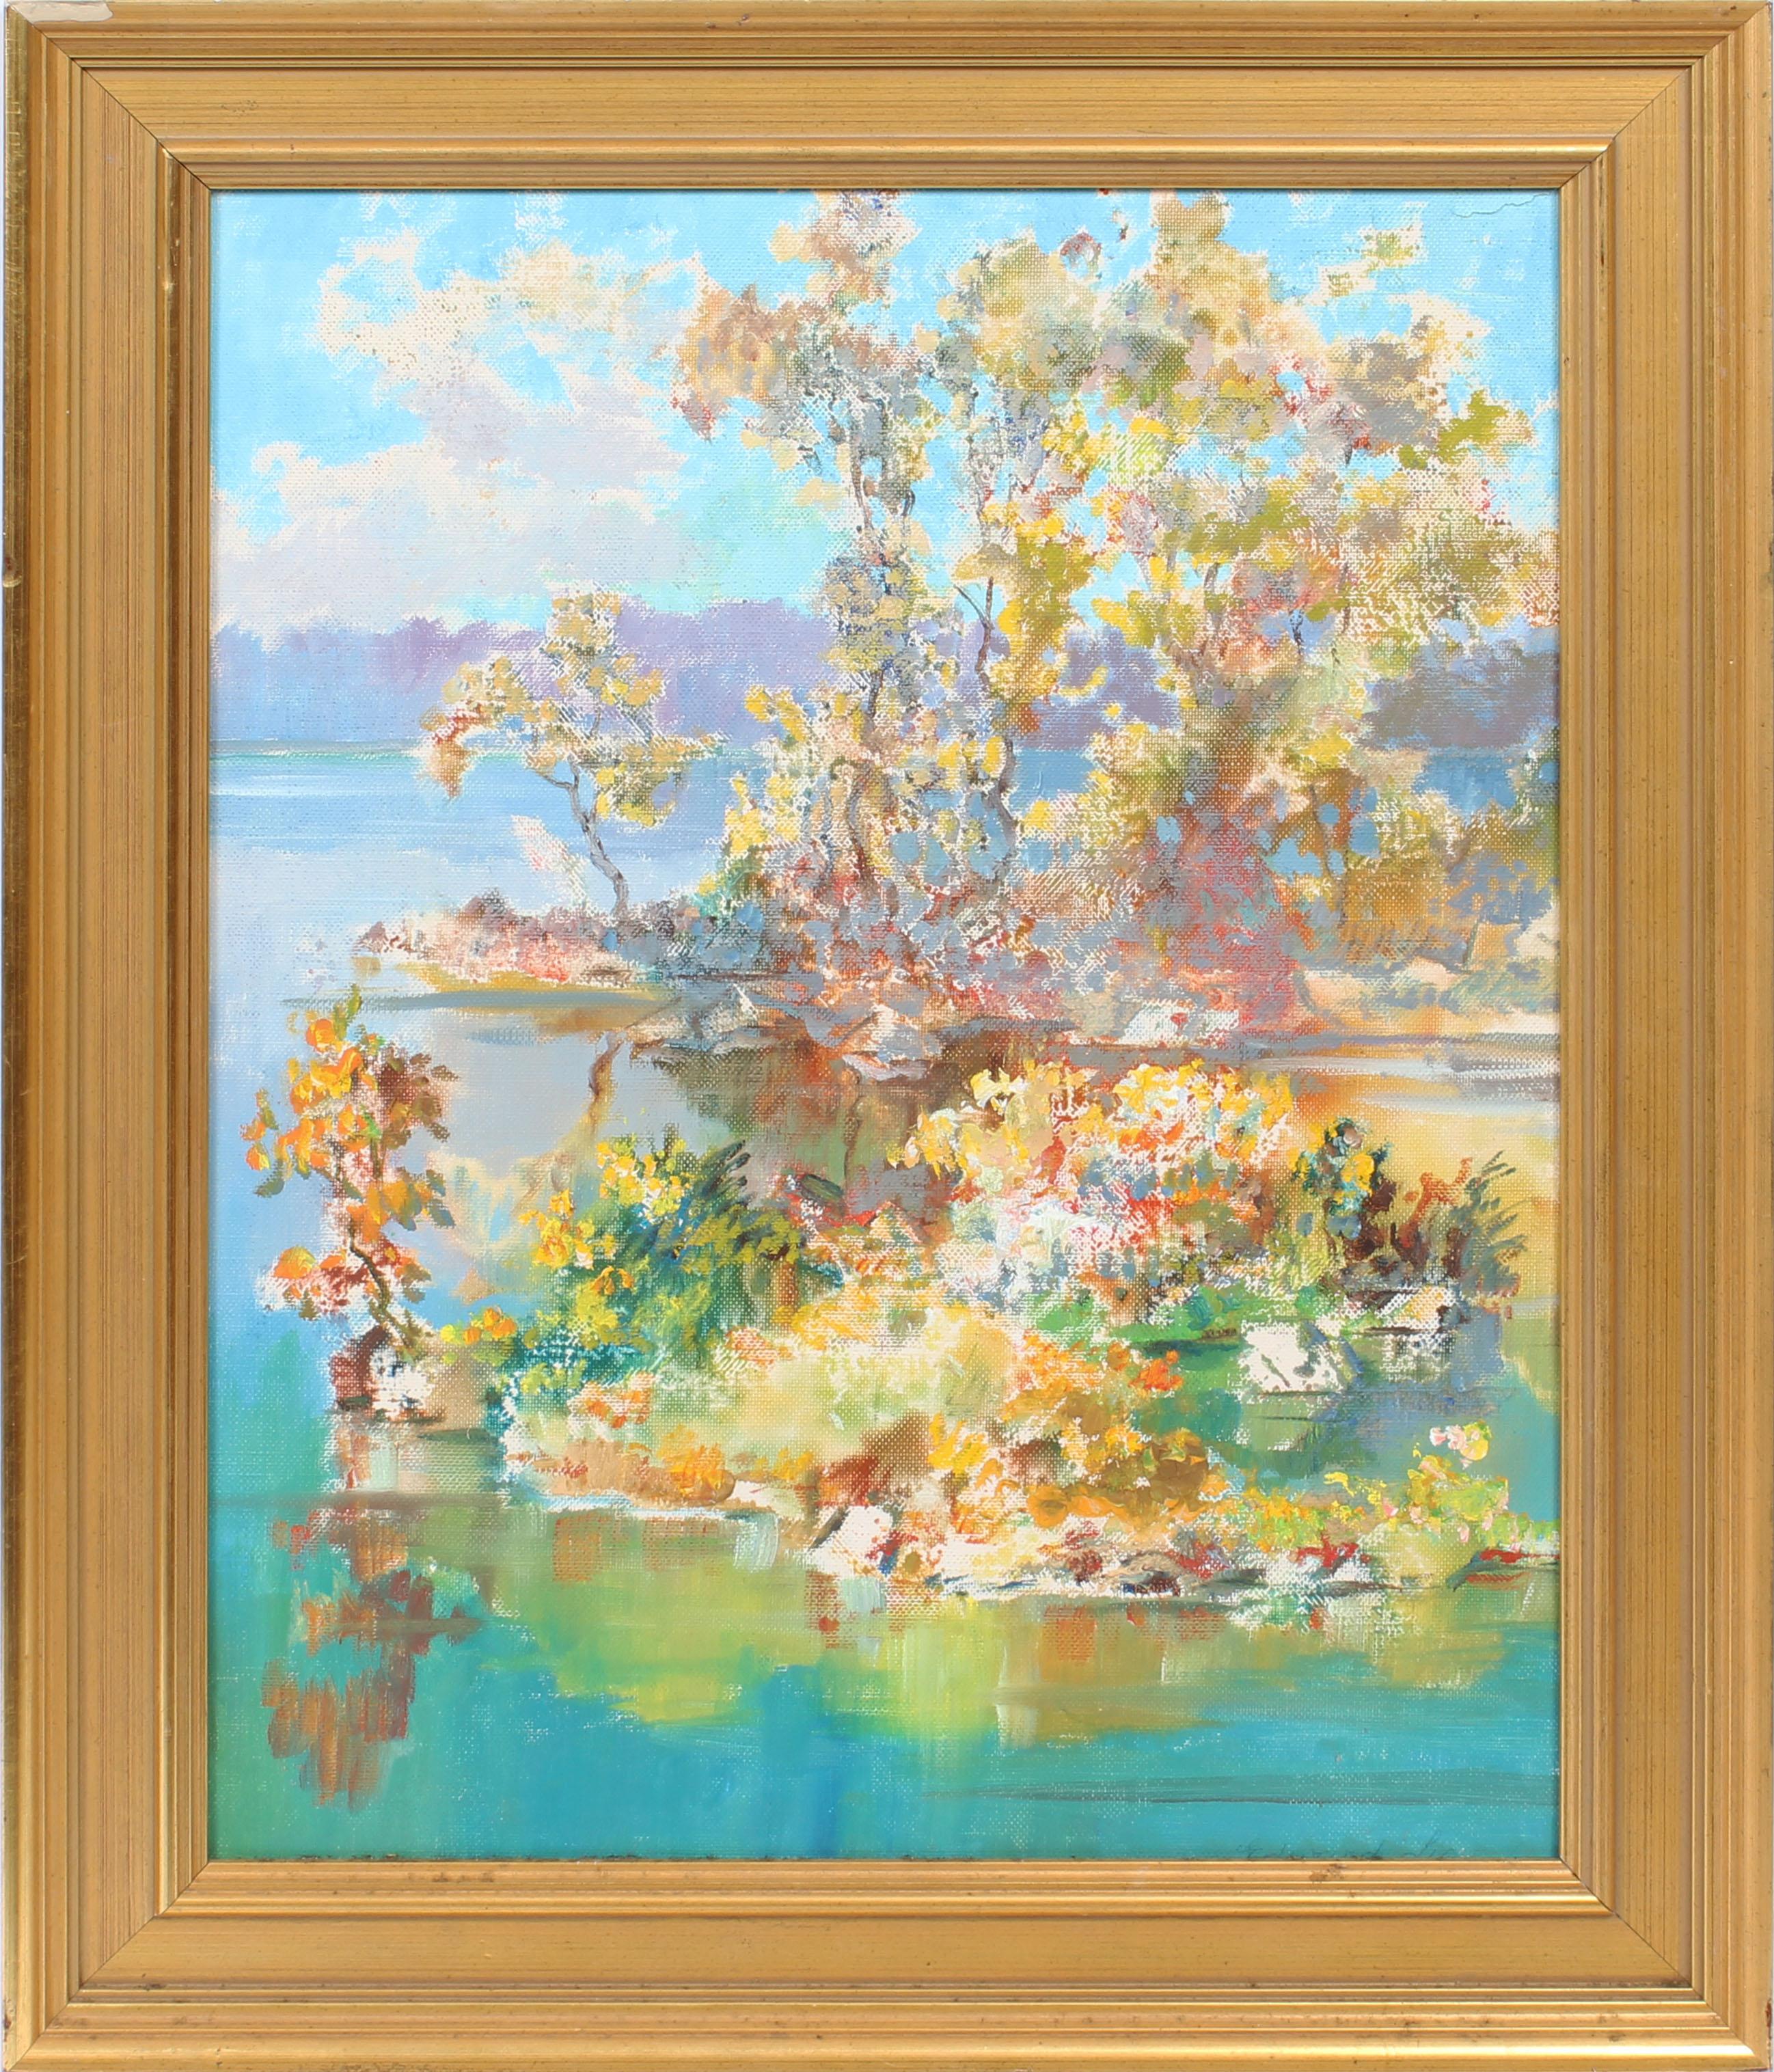 Edward Lis Landscape Painting - Antique American Impressionist Tropical Summer Bright Seascape Oil Painting